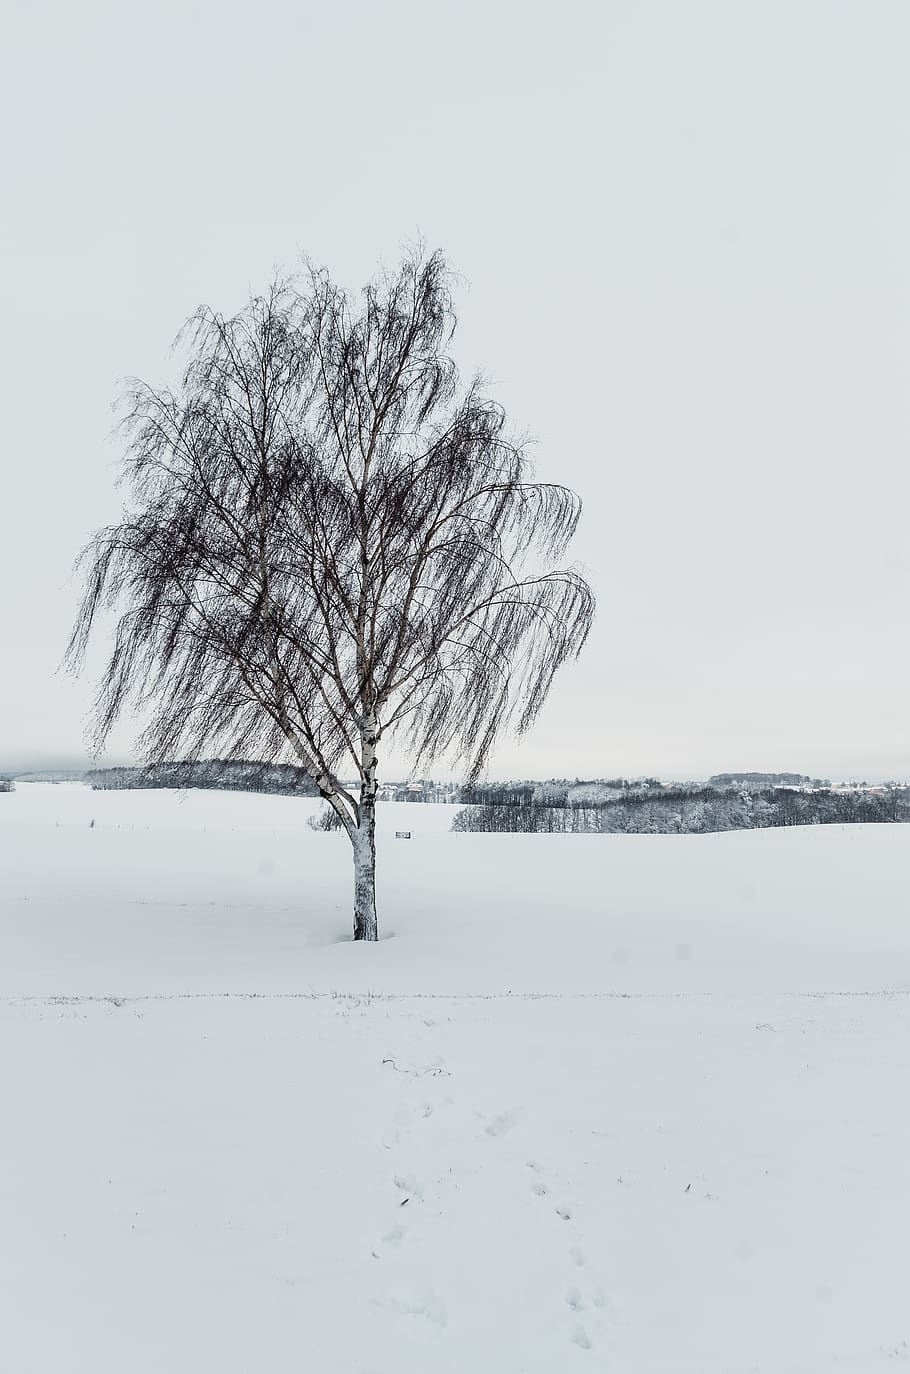 wind blowing on tree on snow filed during daytime, nature, outdoors